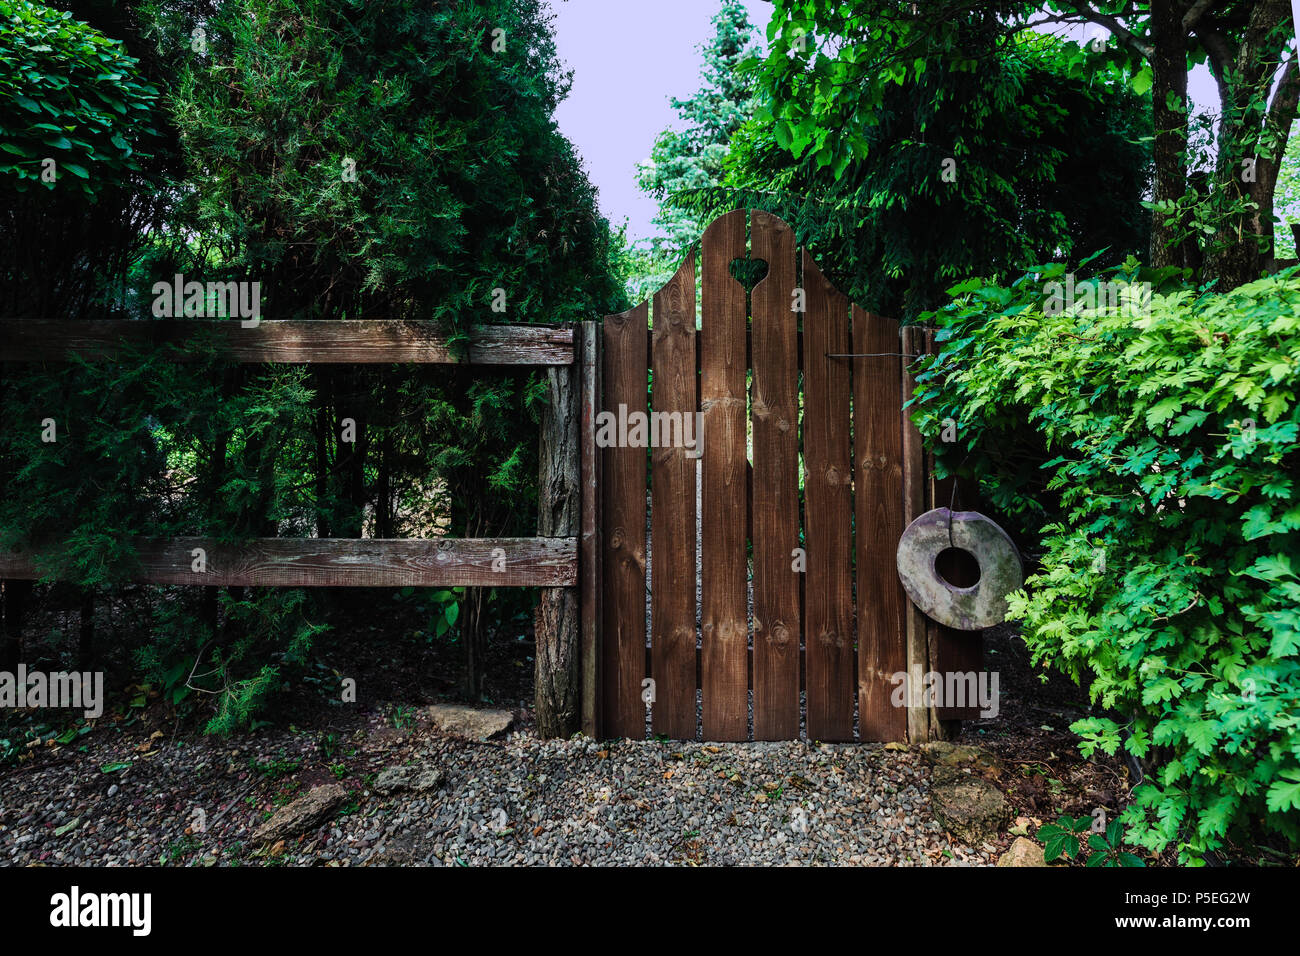 Old wooden fence and wicket in home garden Stock Photo